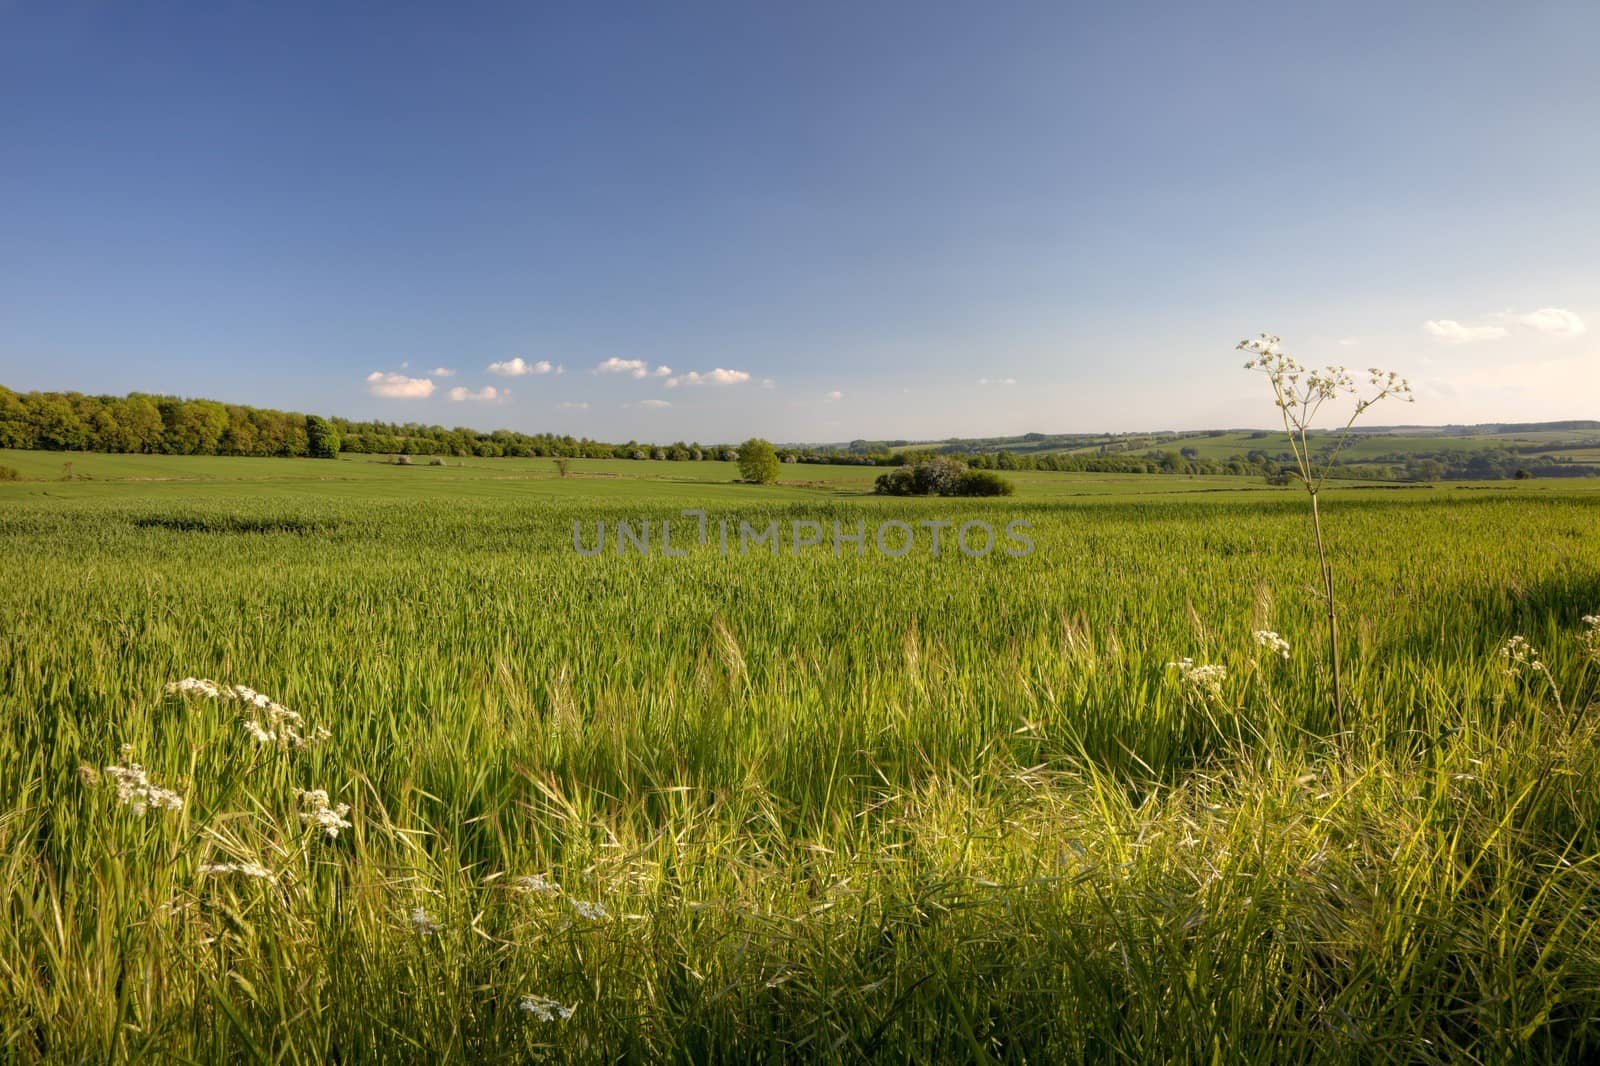 Crops growing near the Cotswold village of Cutsdean, Gloucestershire, England.